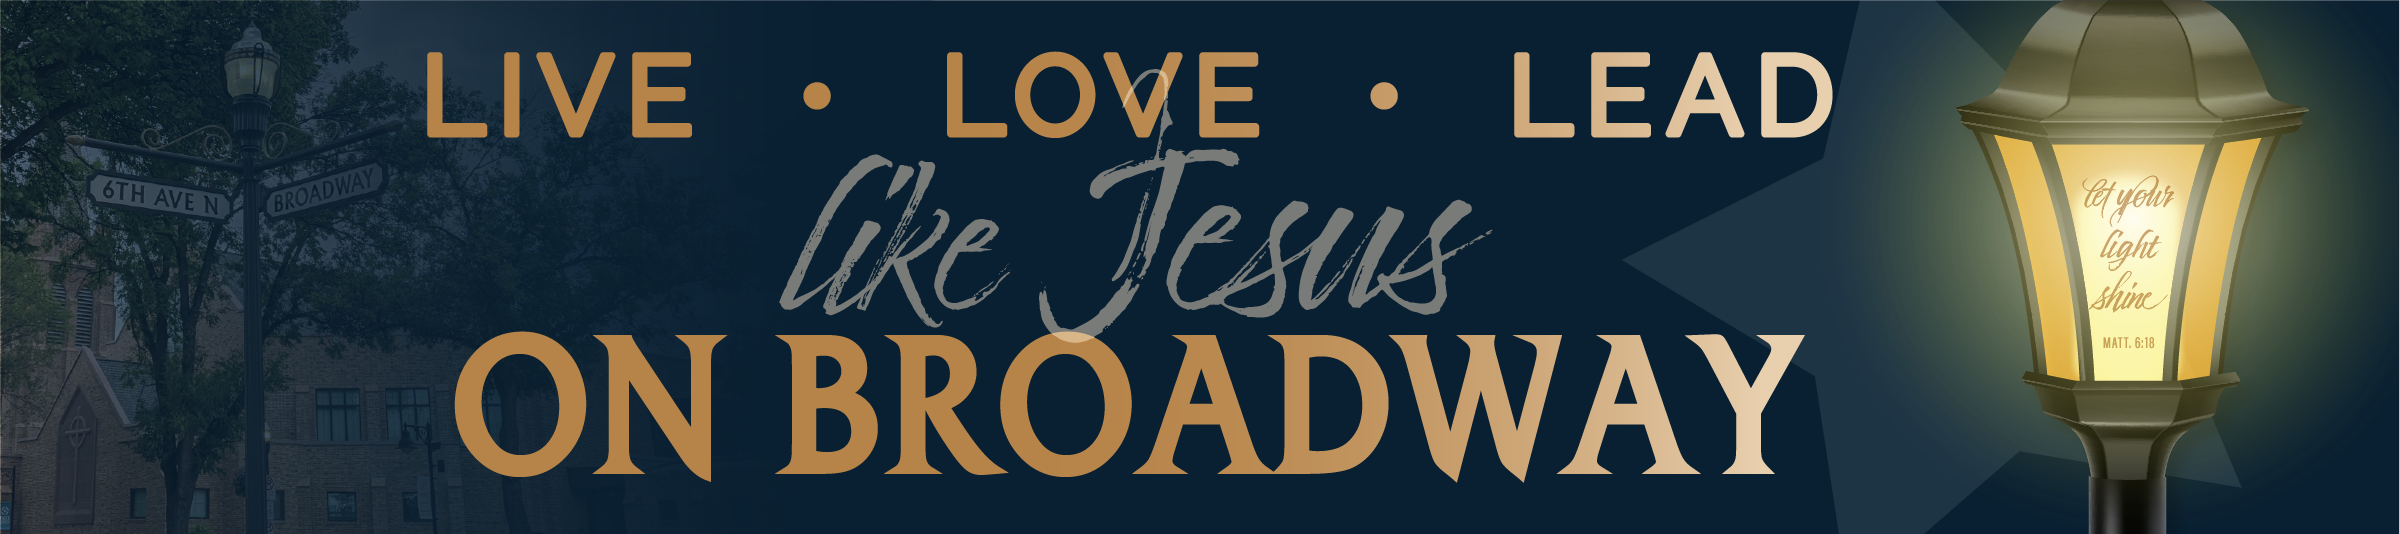 LLL like Jesus on Broadway-04.png